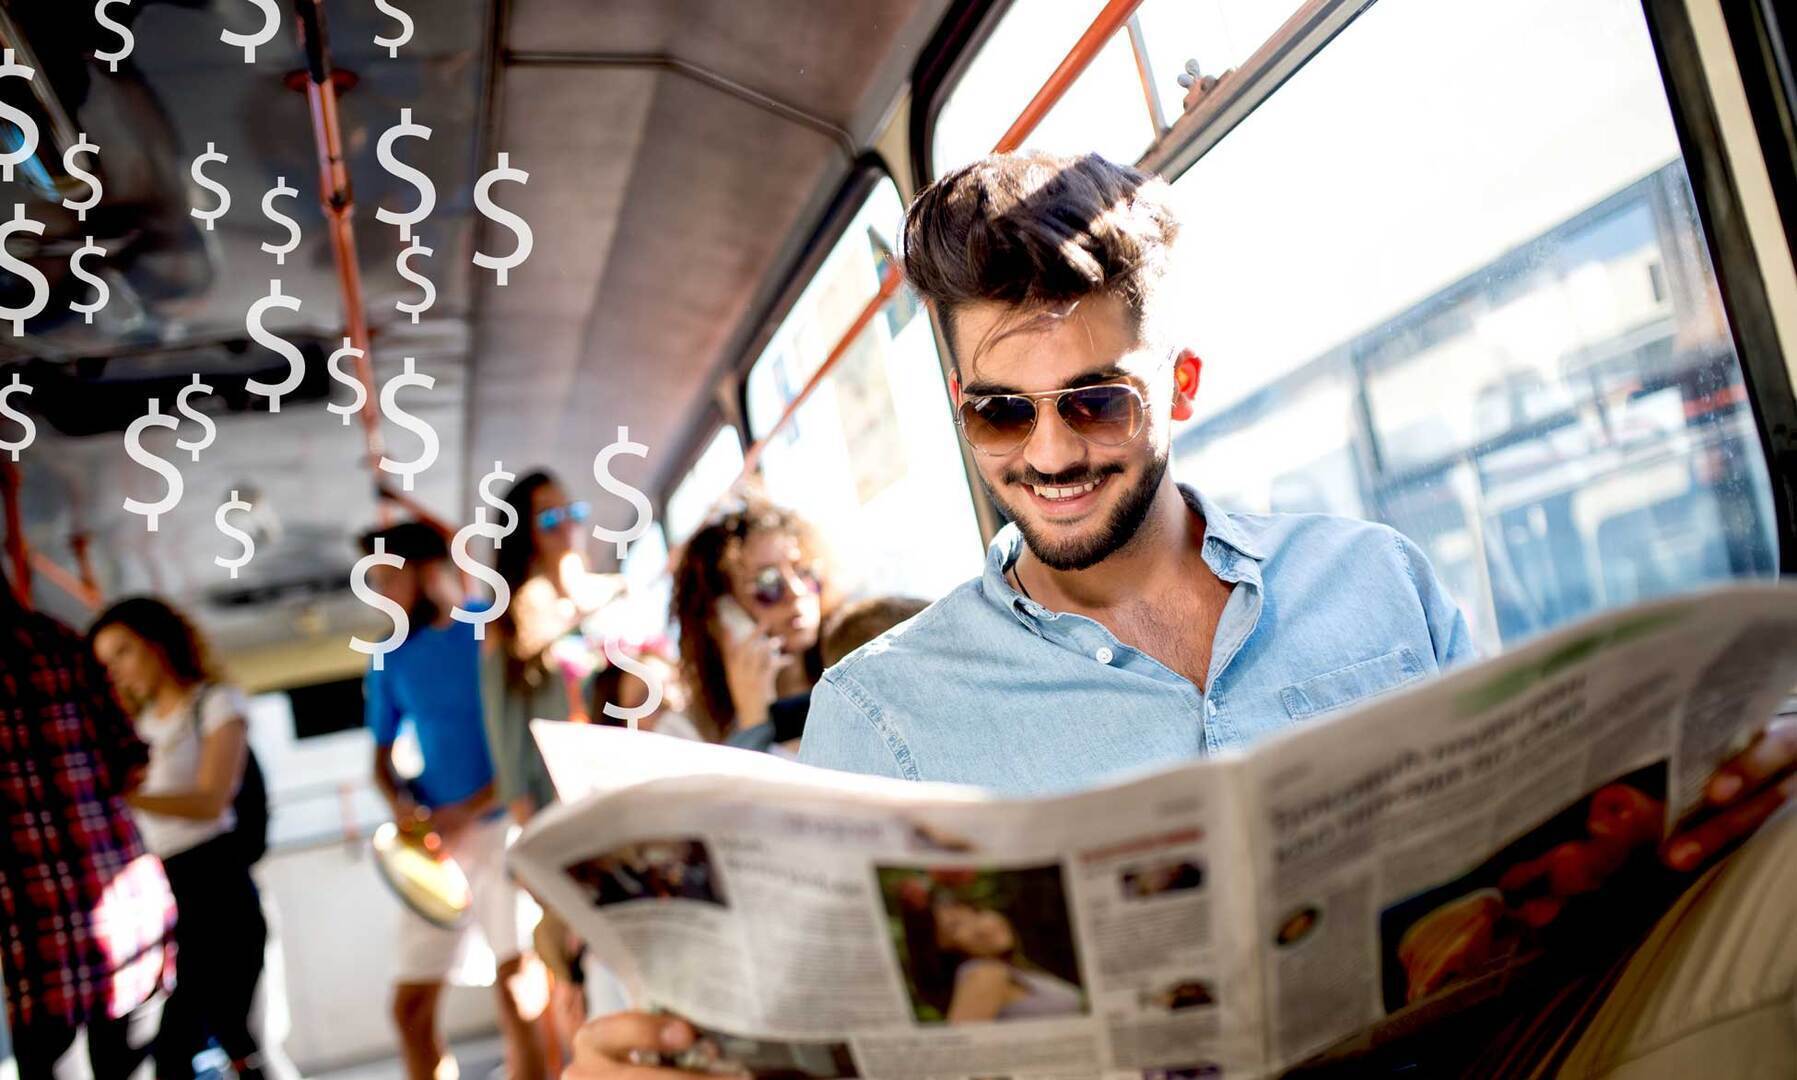 man reading paper on a bus with dollars signs in the air